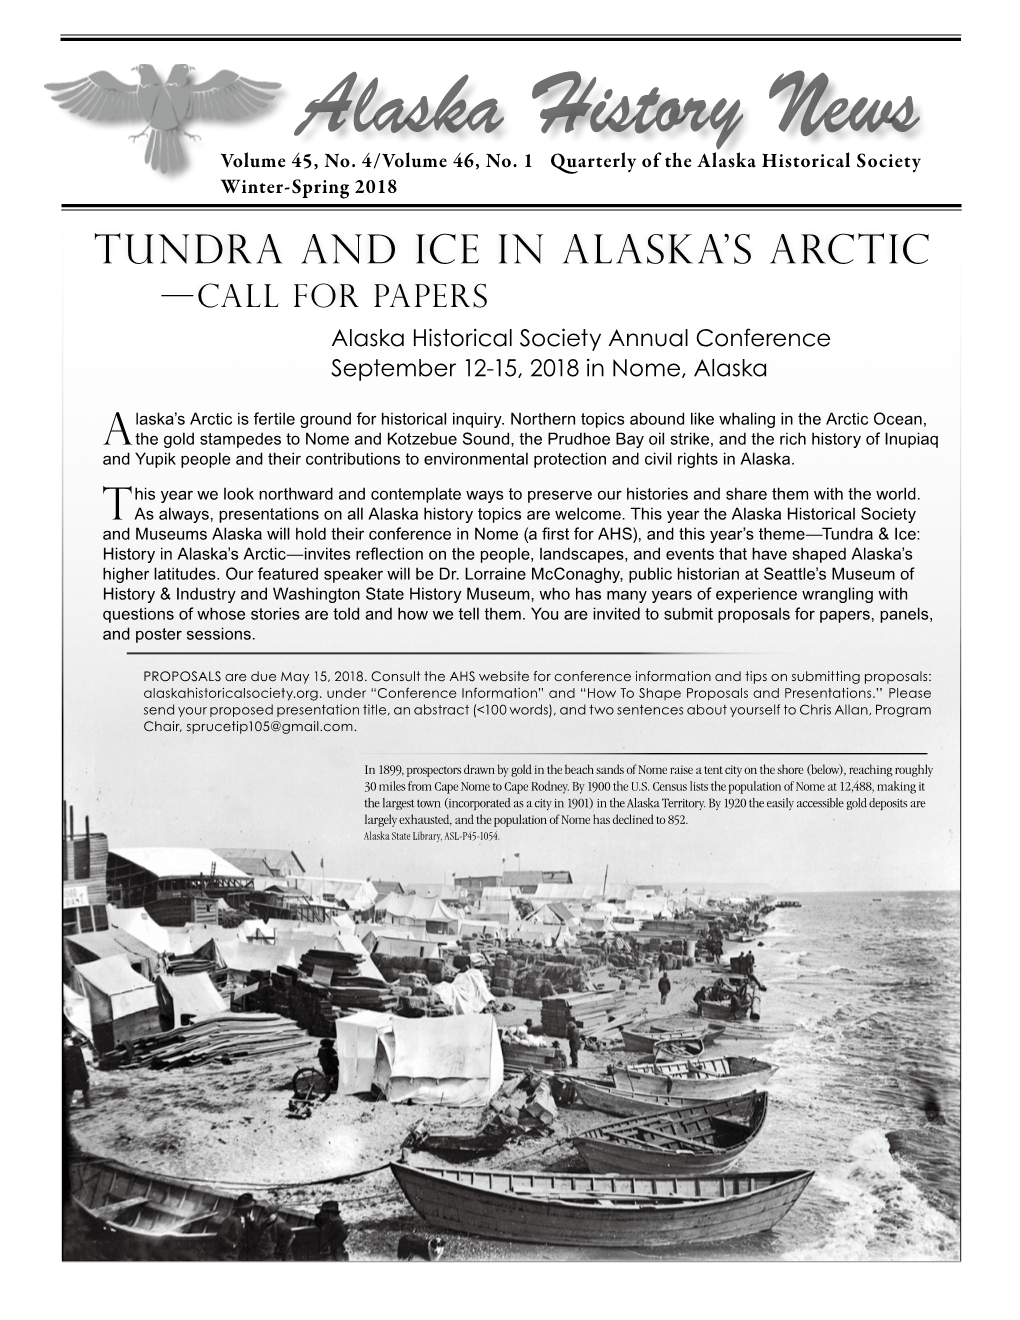 Tundra and Ice in Alaska's Arctic —Call for Papers Alaska Historical Society Annual Conference September 12-15, 2018 in Nome, Alaska